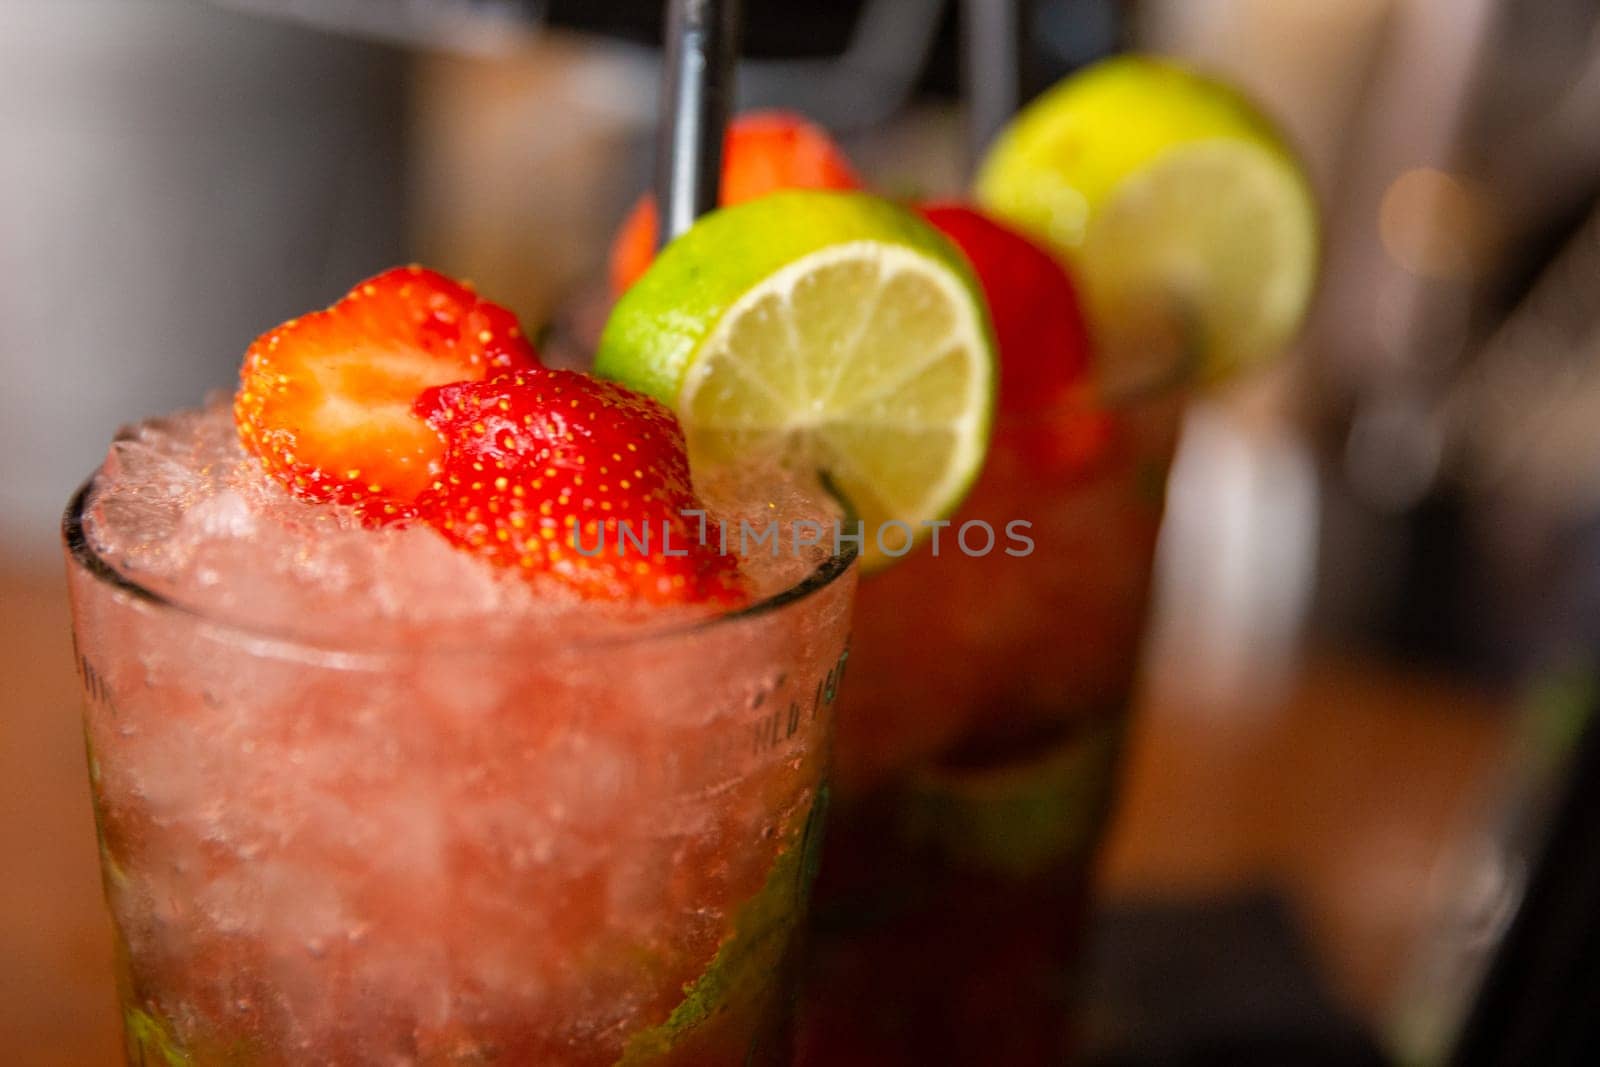 Two strawberry drinks at a bar to drink